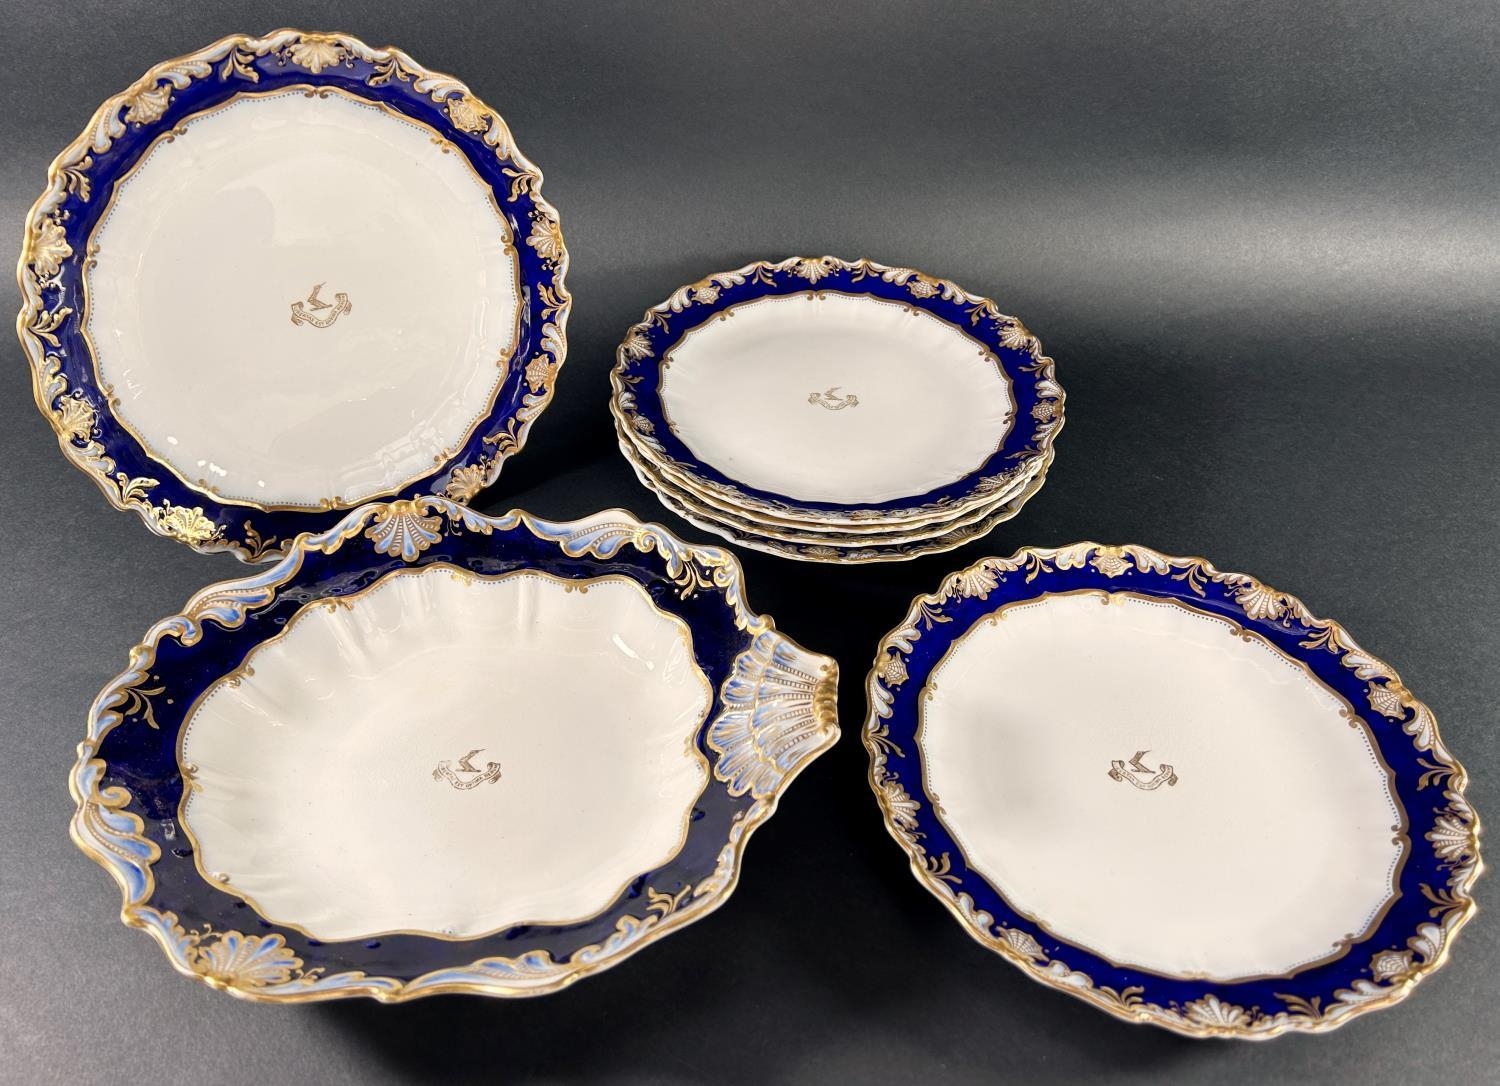 Seven George Jones blue and gilt plates with armorial detail, some Victorian cranberry glass ware - Image 2 of 2